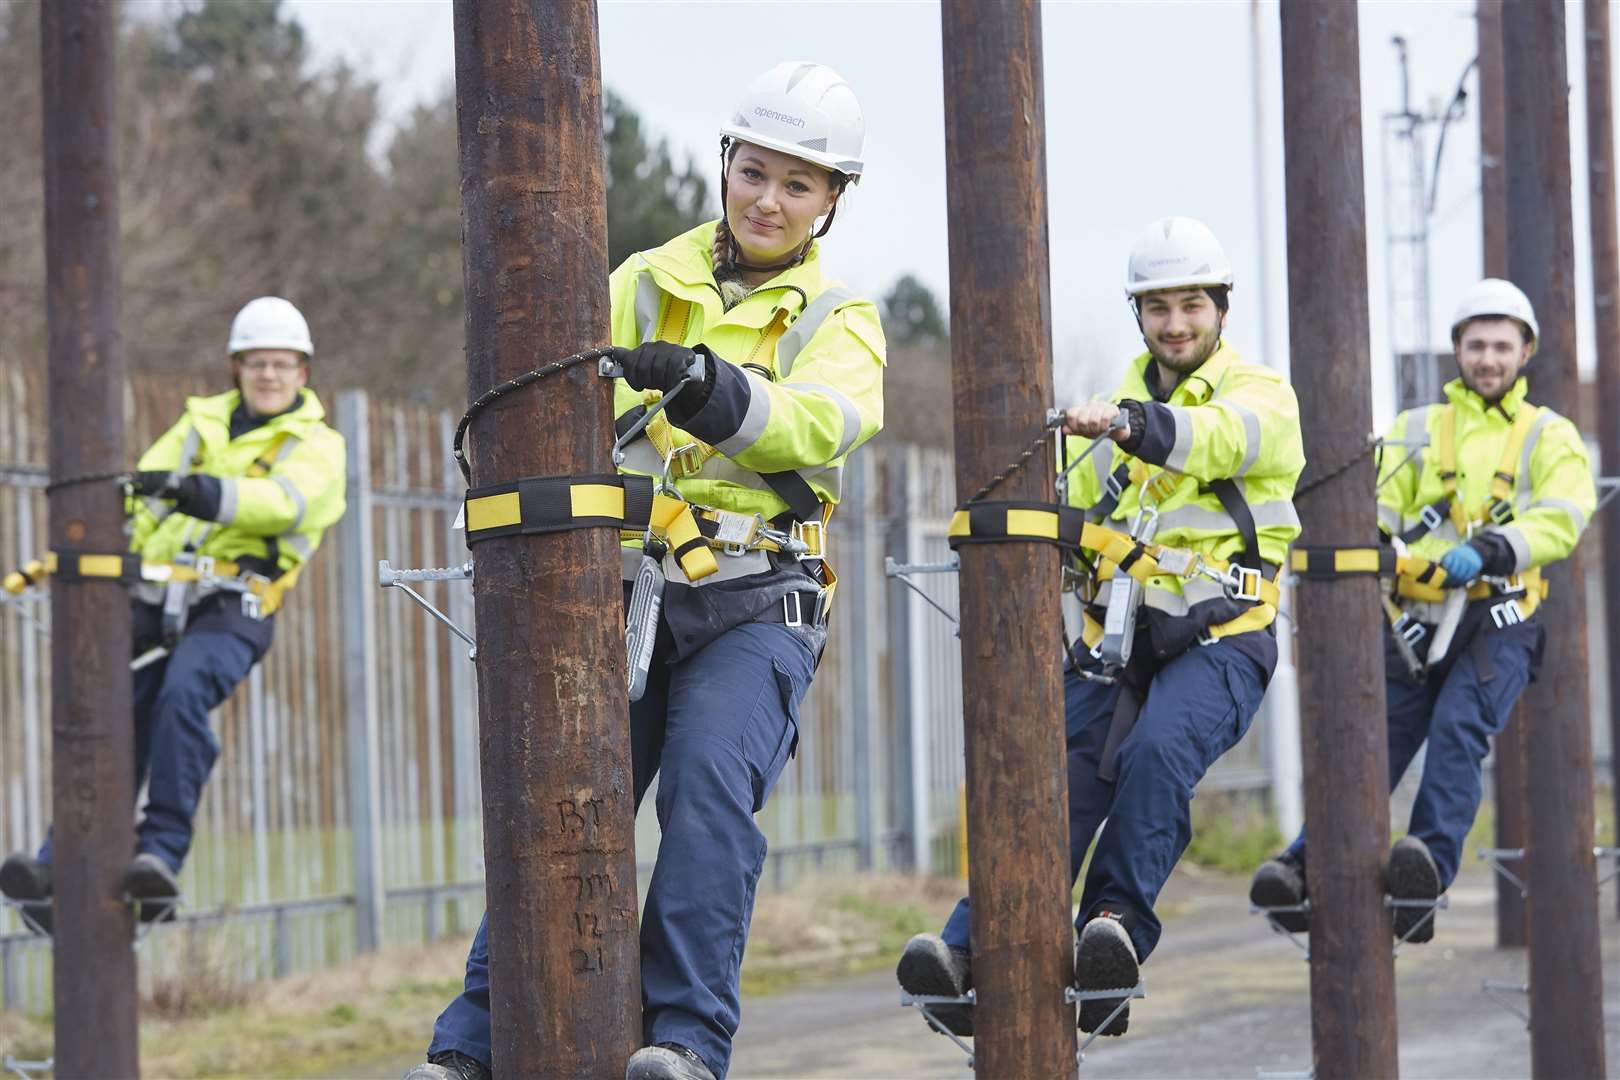 Openreach is recruiting new engineers in Inverness and Moray.